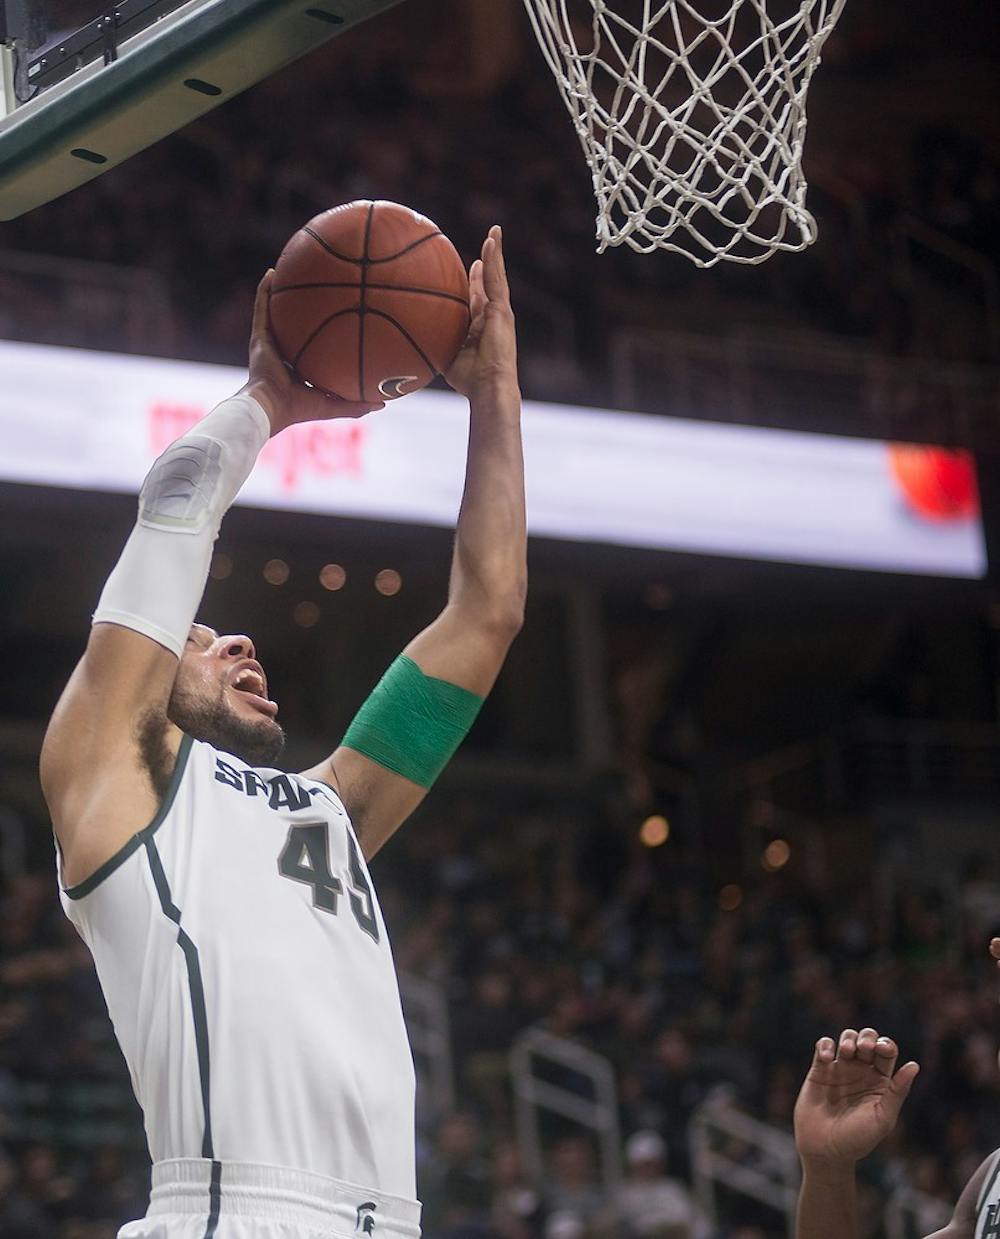 <p>Junior guard Denzel Valentine goes for a point Nov. 24, 2014, during the game against Santa Clara at Breslin Center. The Spartans defeated the Broncos, 79-52. Erin Hampton/The State News</p>